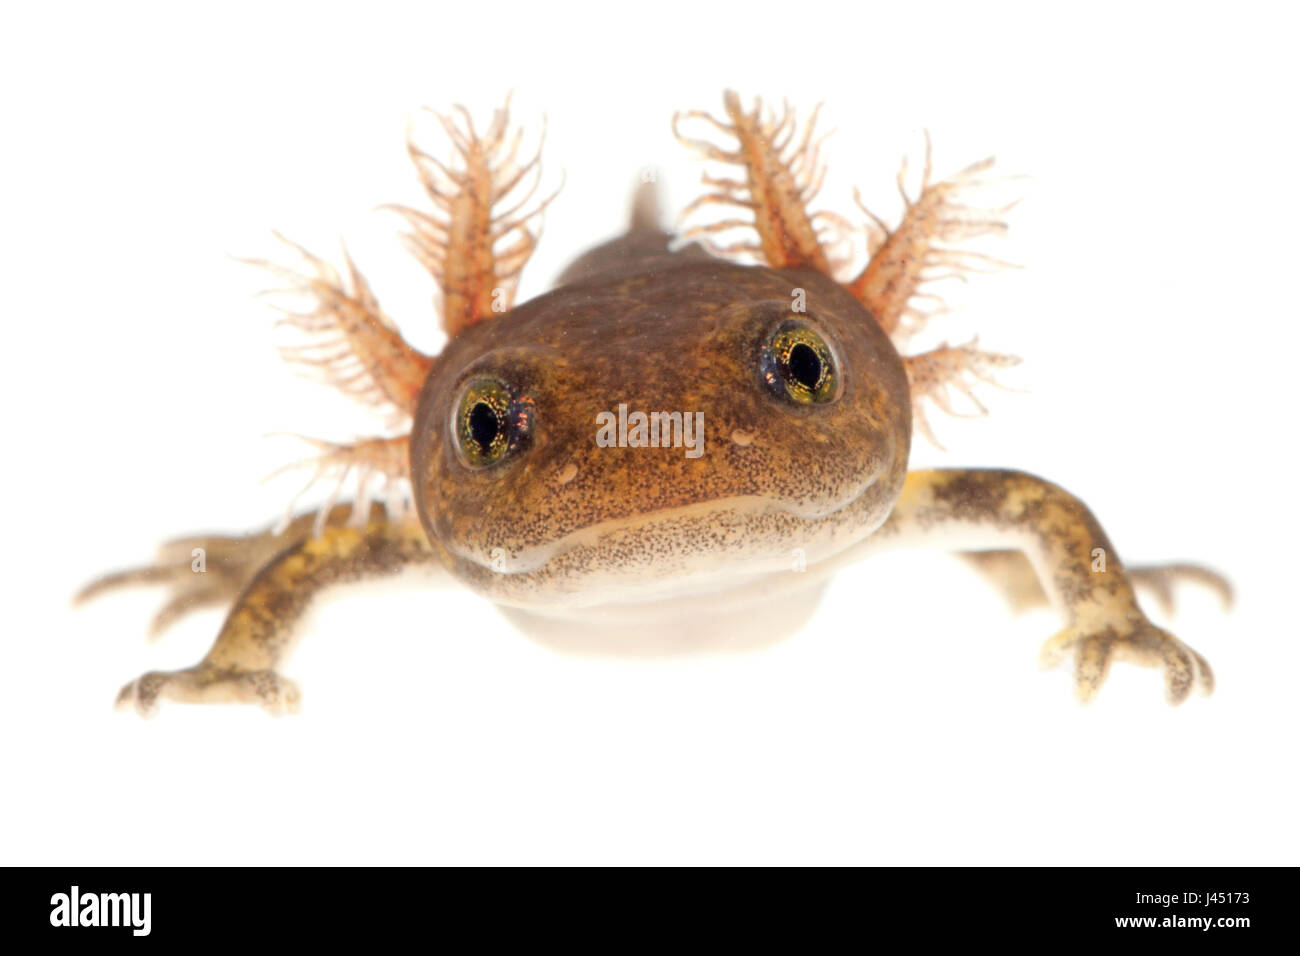 larva of fire salamander photographed on a white background Stock Photo